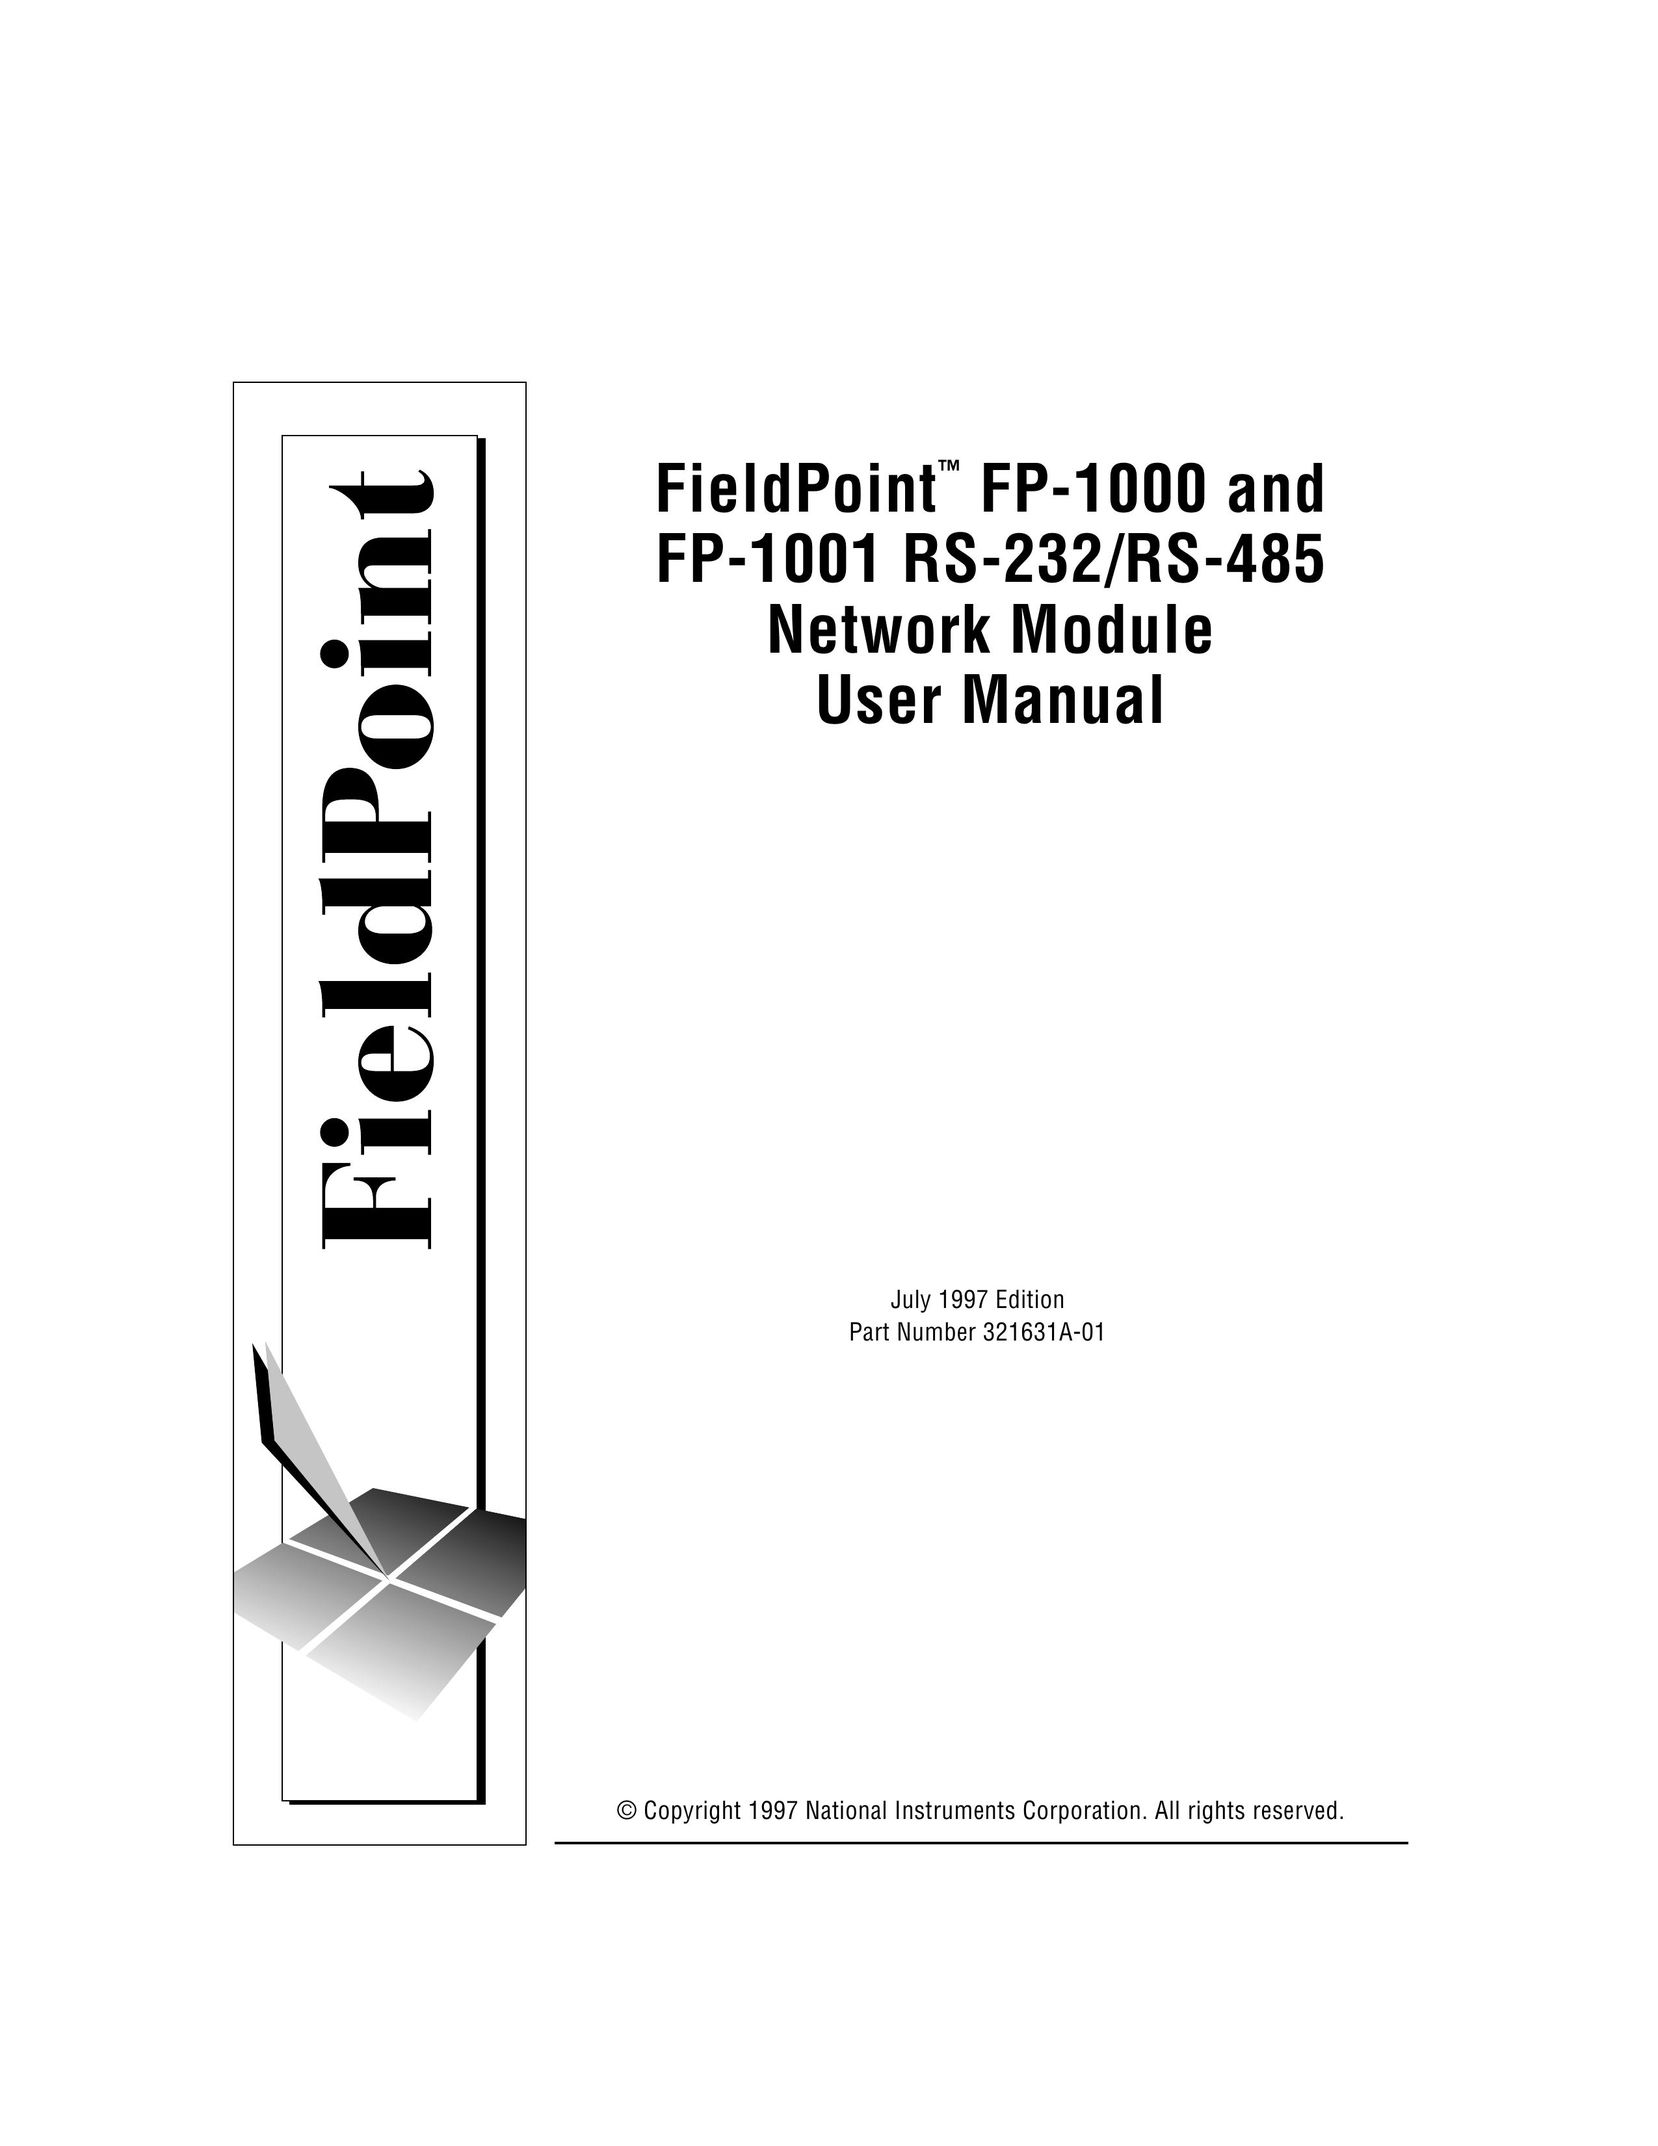 National Instruments FP-1001 Network Card User Manual